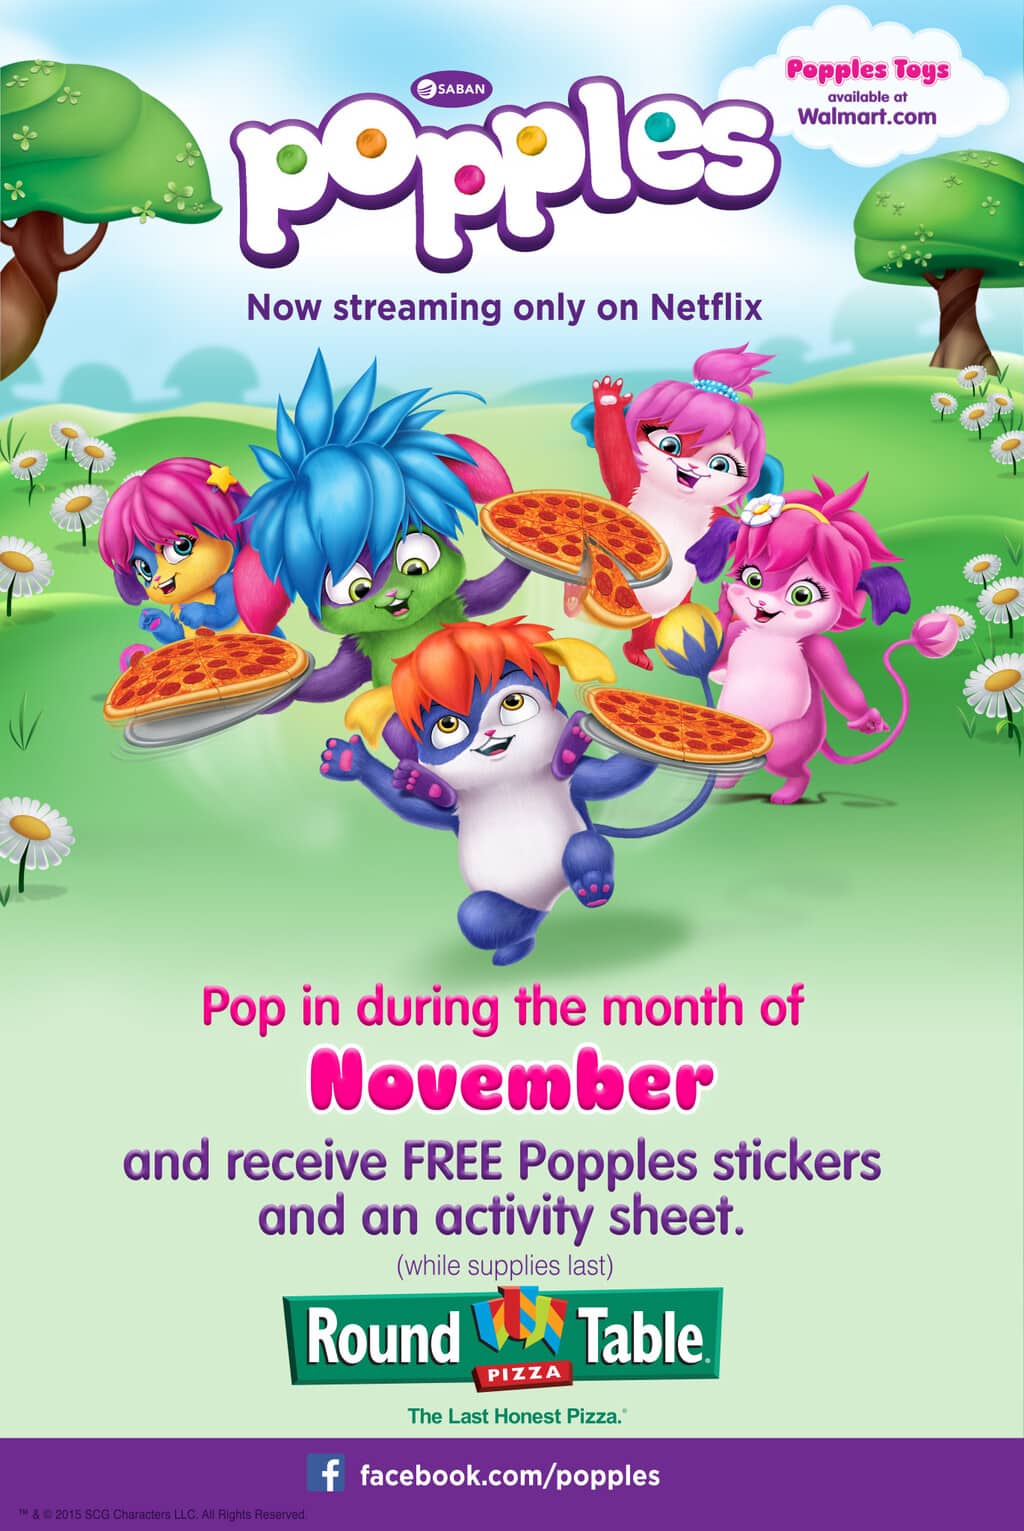 Popples are Back at Netflix and Walmart